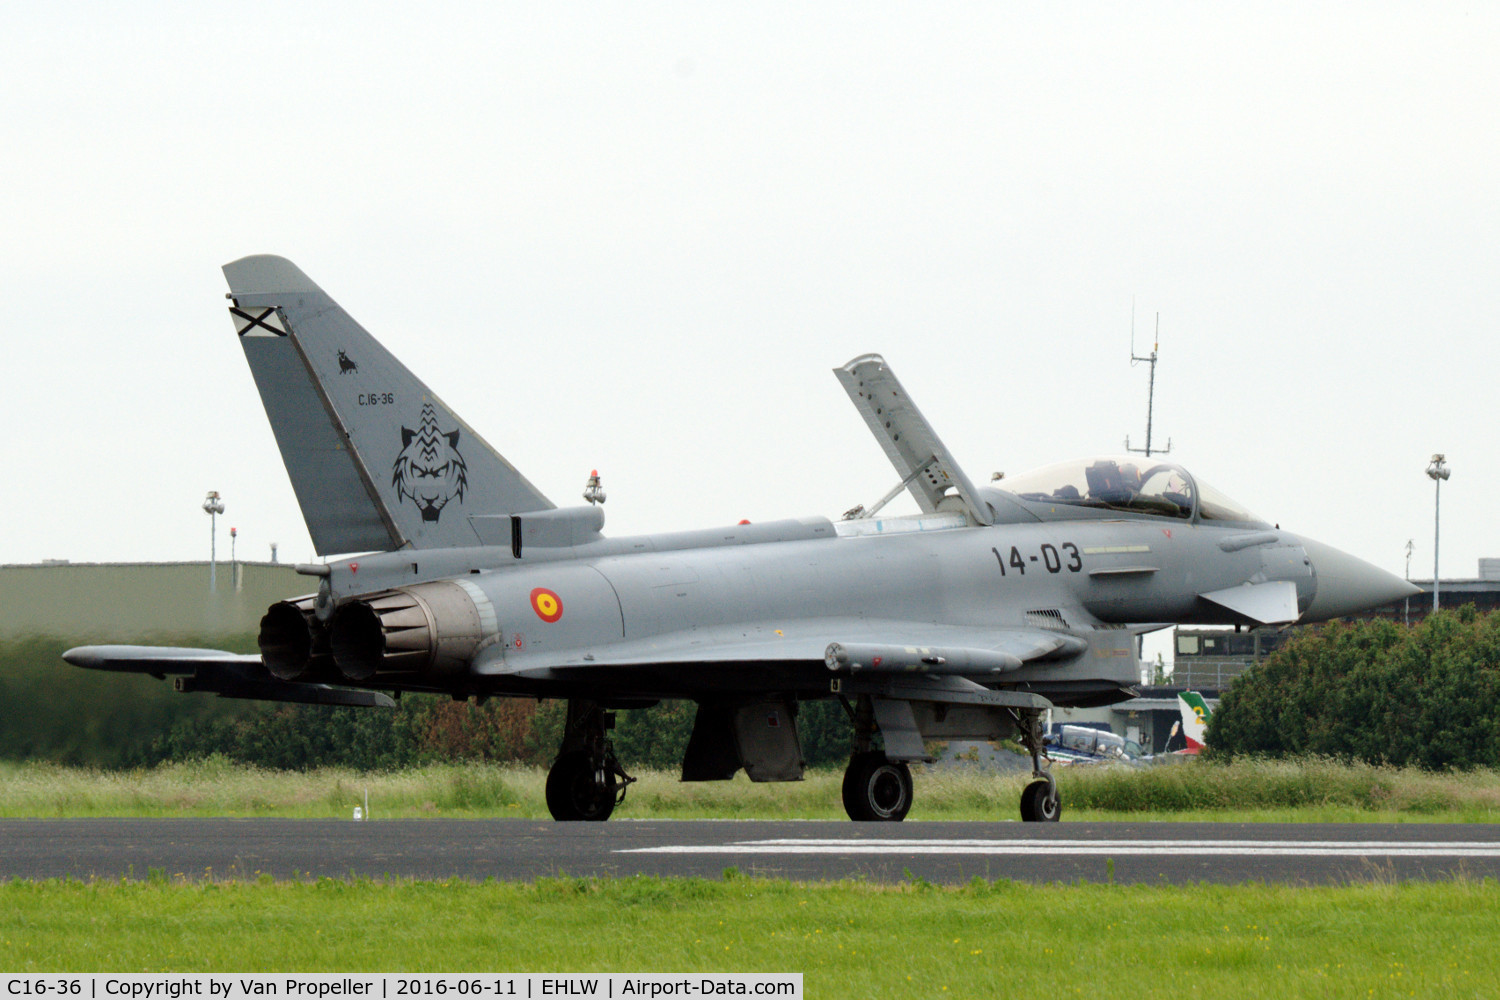 C16-36, Eurofighter EF-2000 Typhoon S C/N SS017, Eurofighter Typhoon of the Spanish Air Force at the 2016 open days at Leeuwarden Air Base, the Netherlands